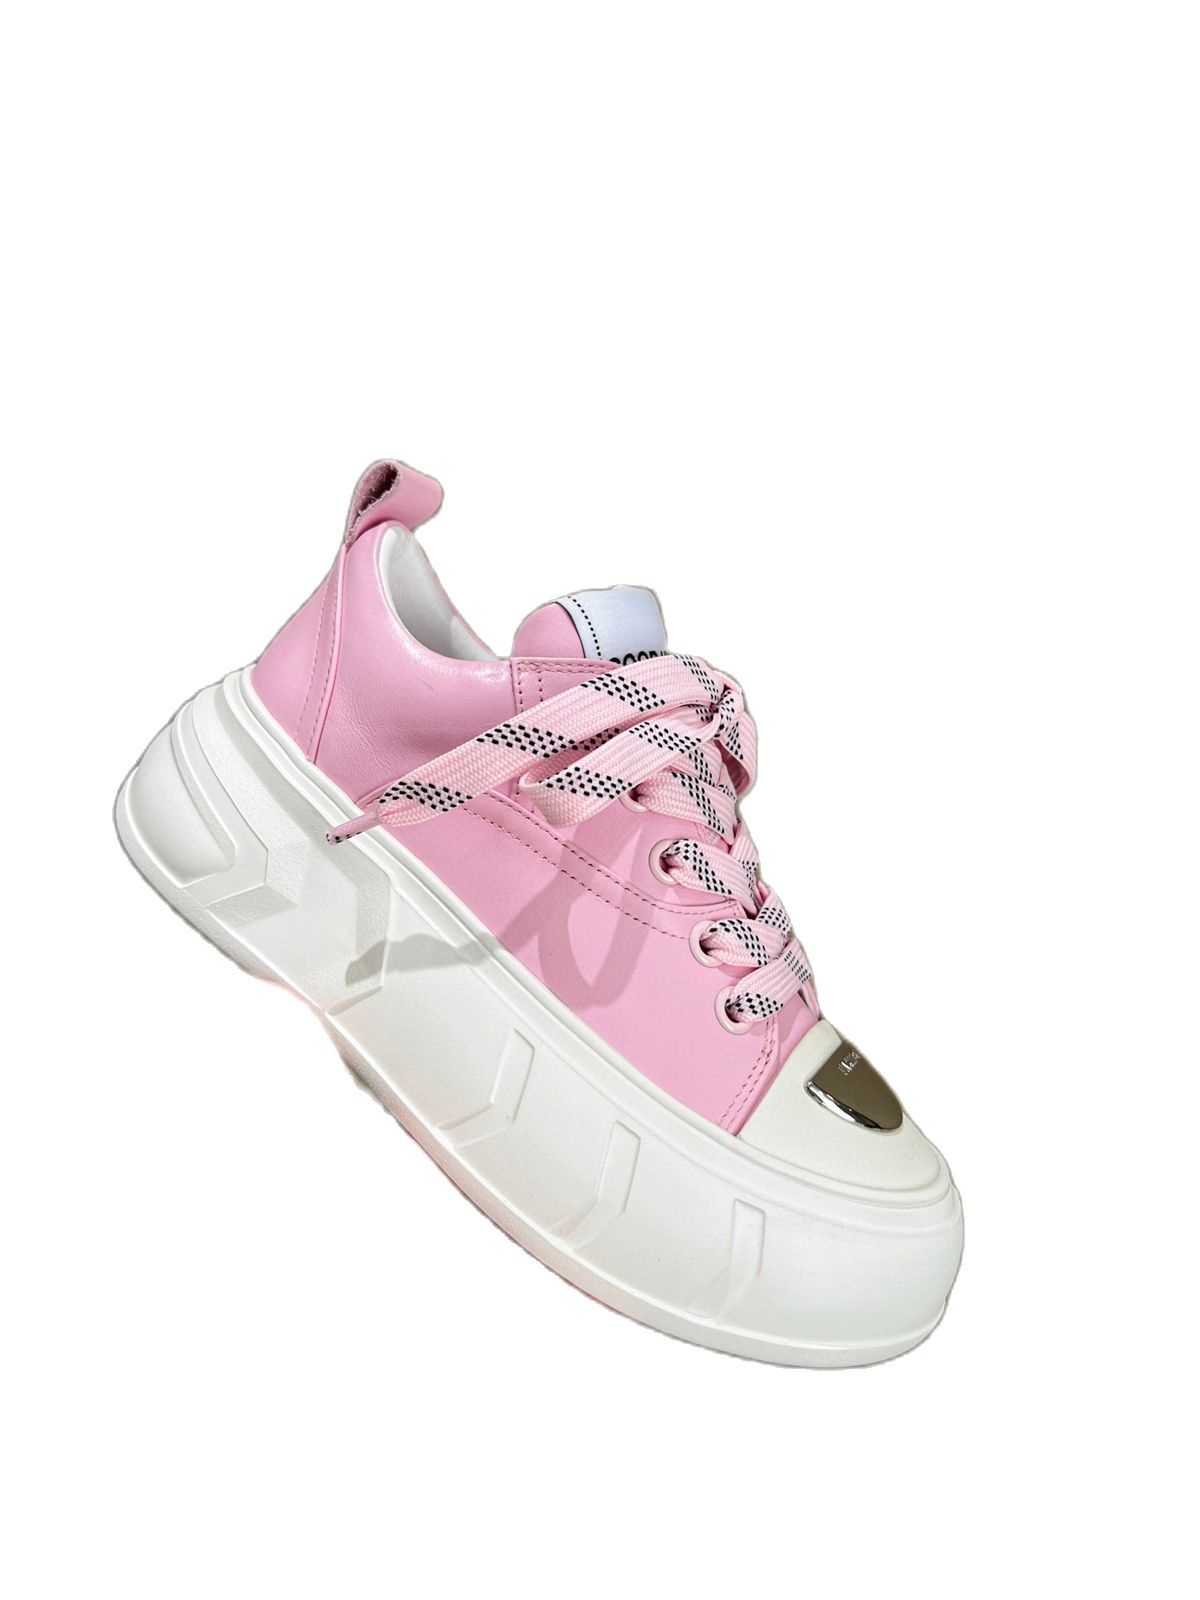 European station, genuine leather, Ladies shoes, spring 2023. New round-headed high-heeled platform shoes, casual sneakers   trend.